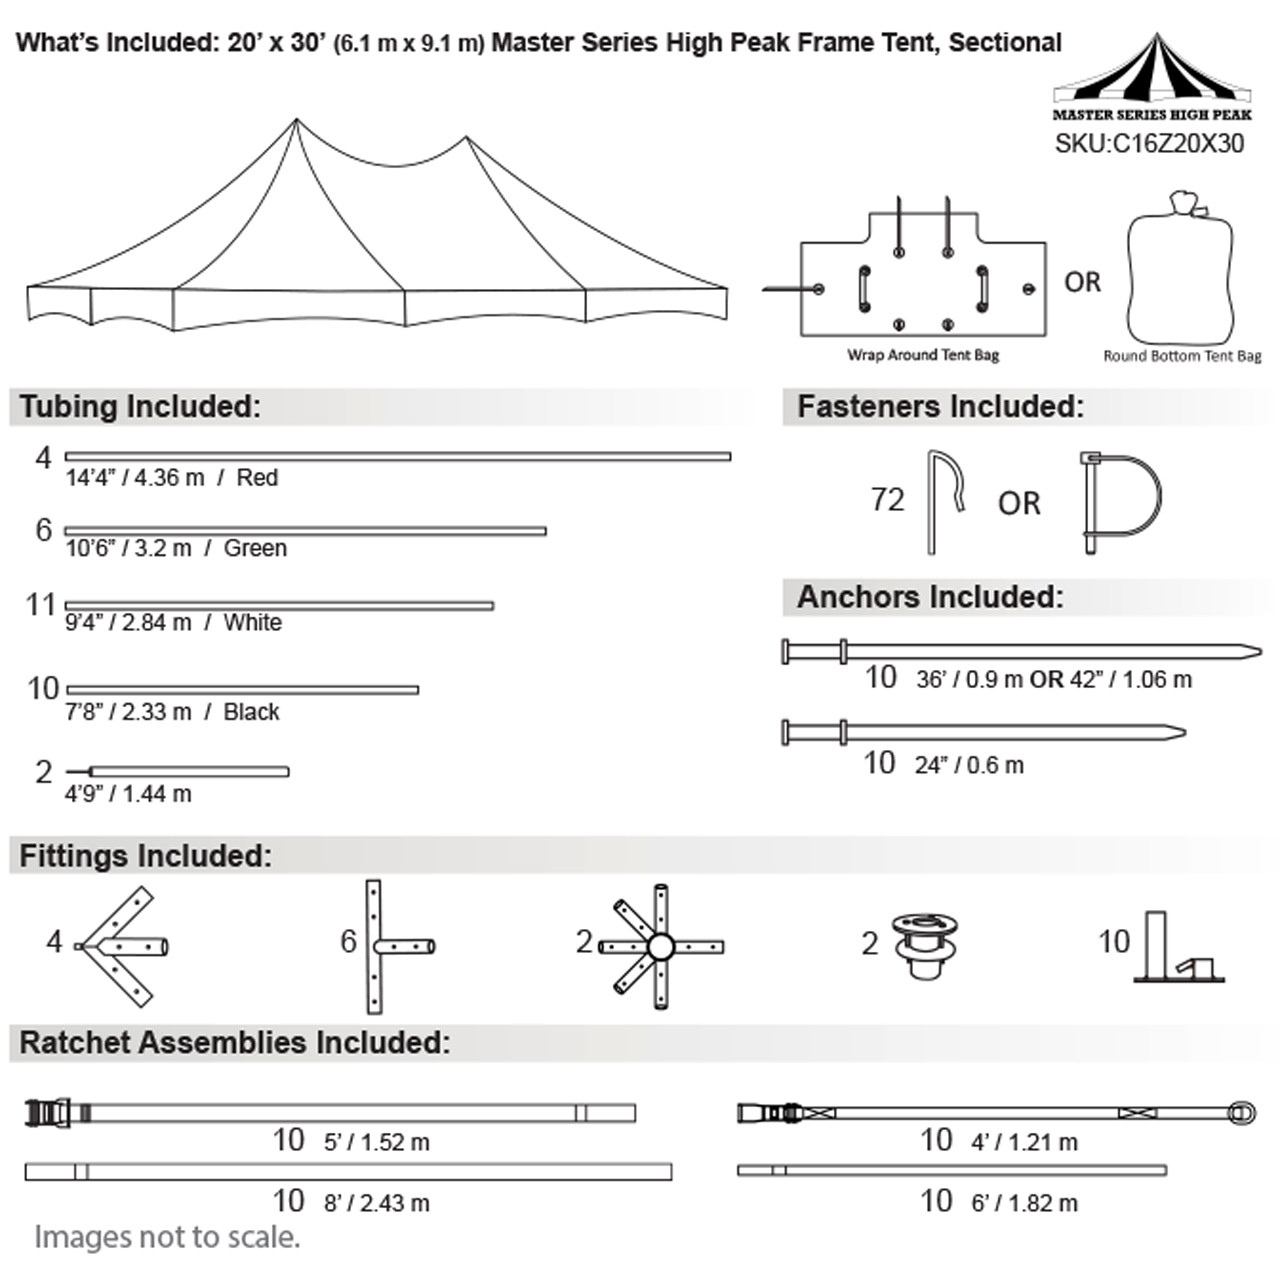 20' x 30' Master Series High Peak Frame Tent, Sectional Tent Top, Complete